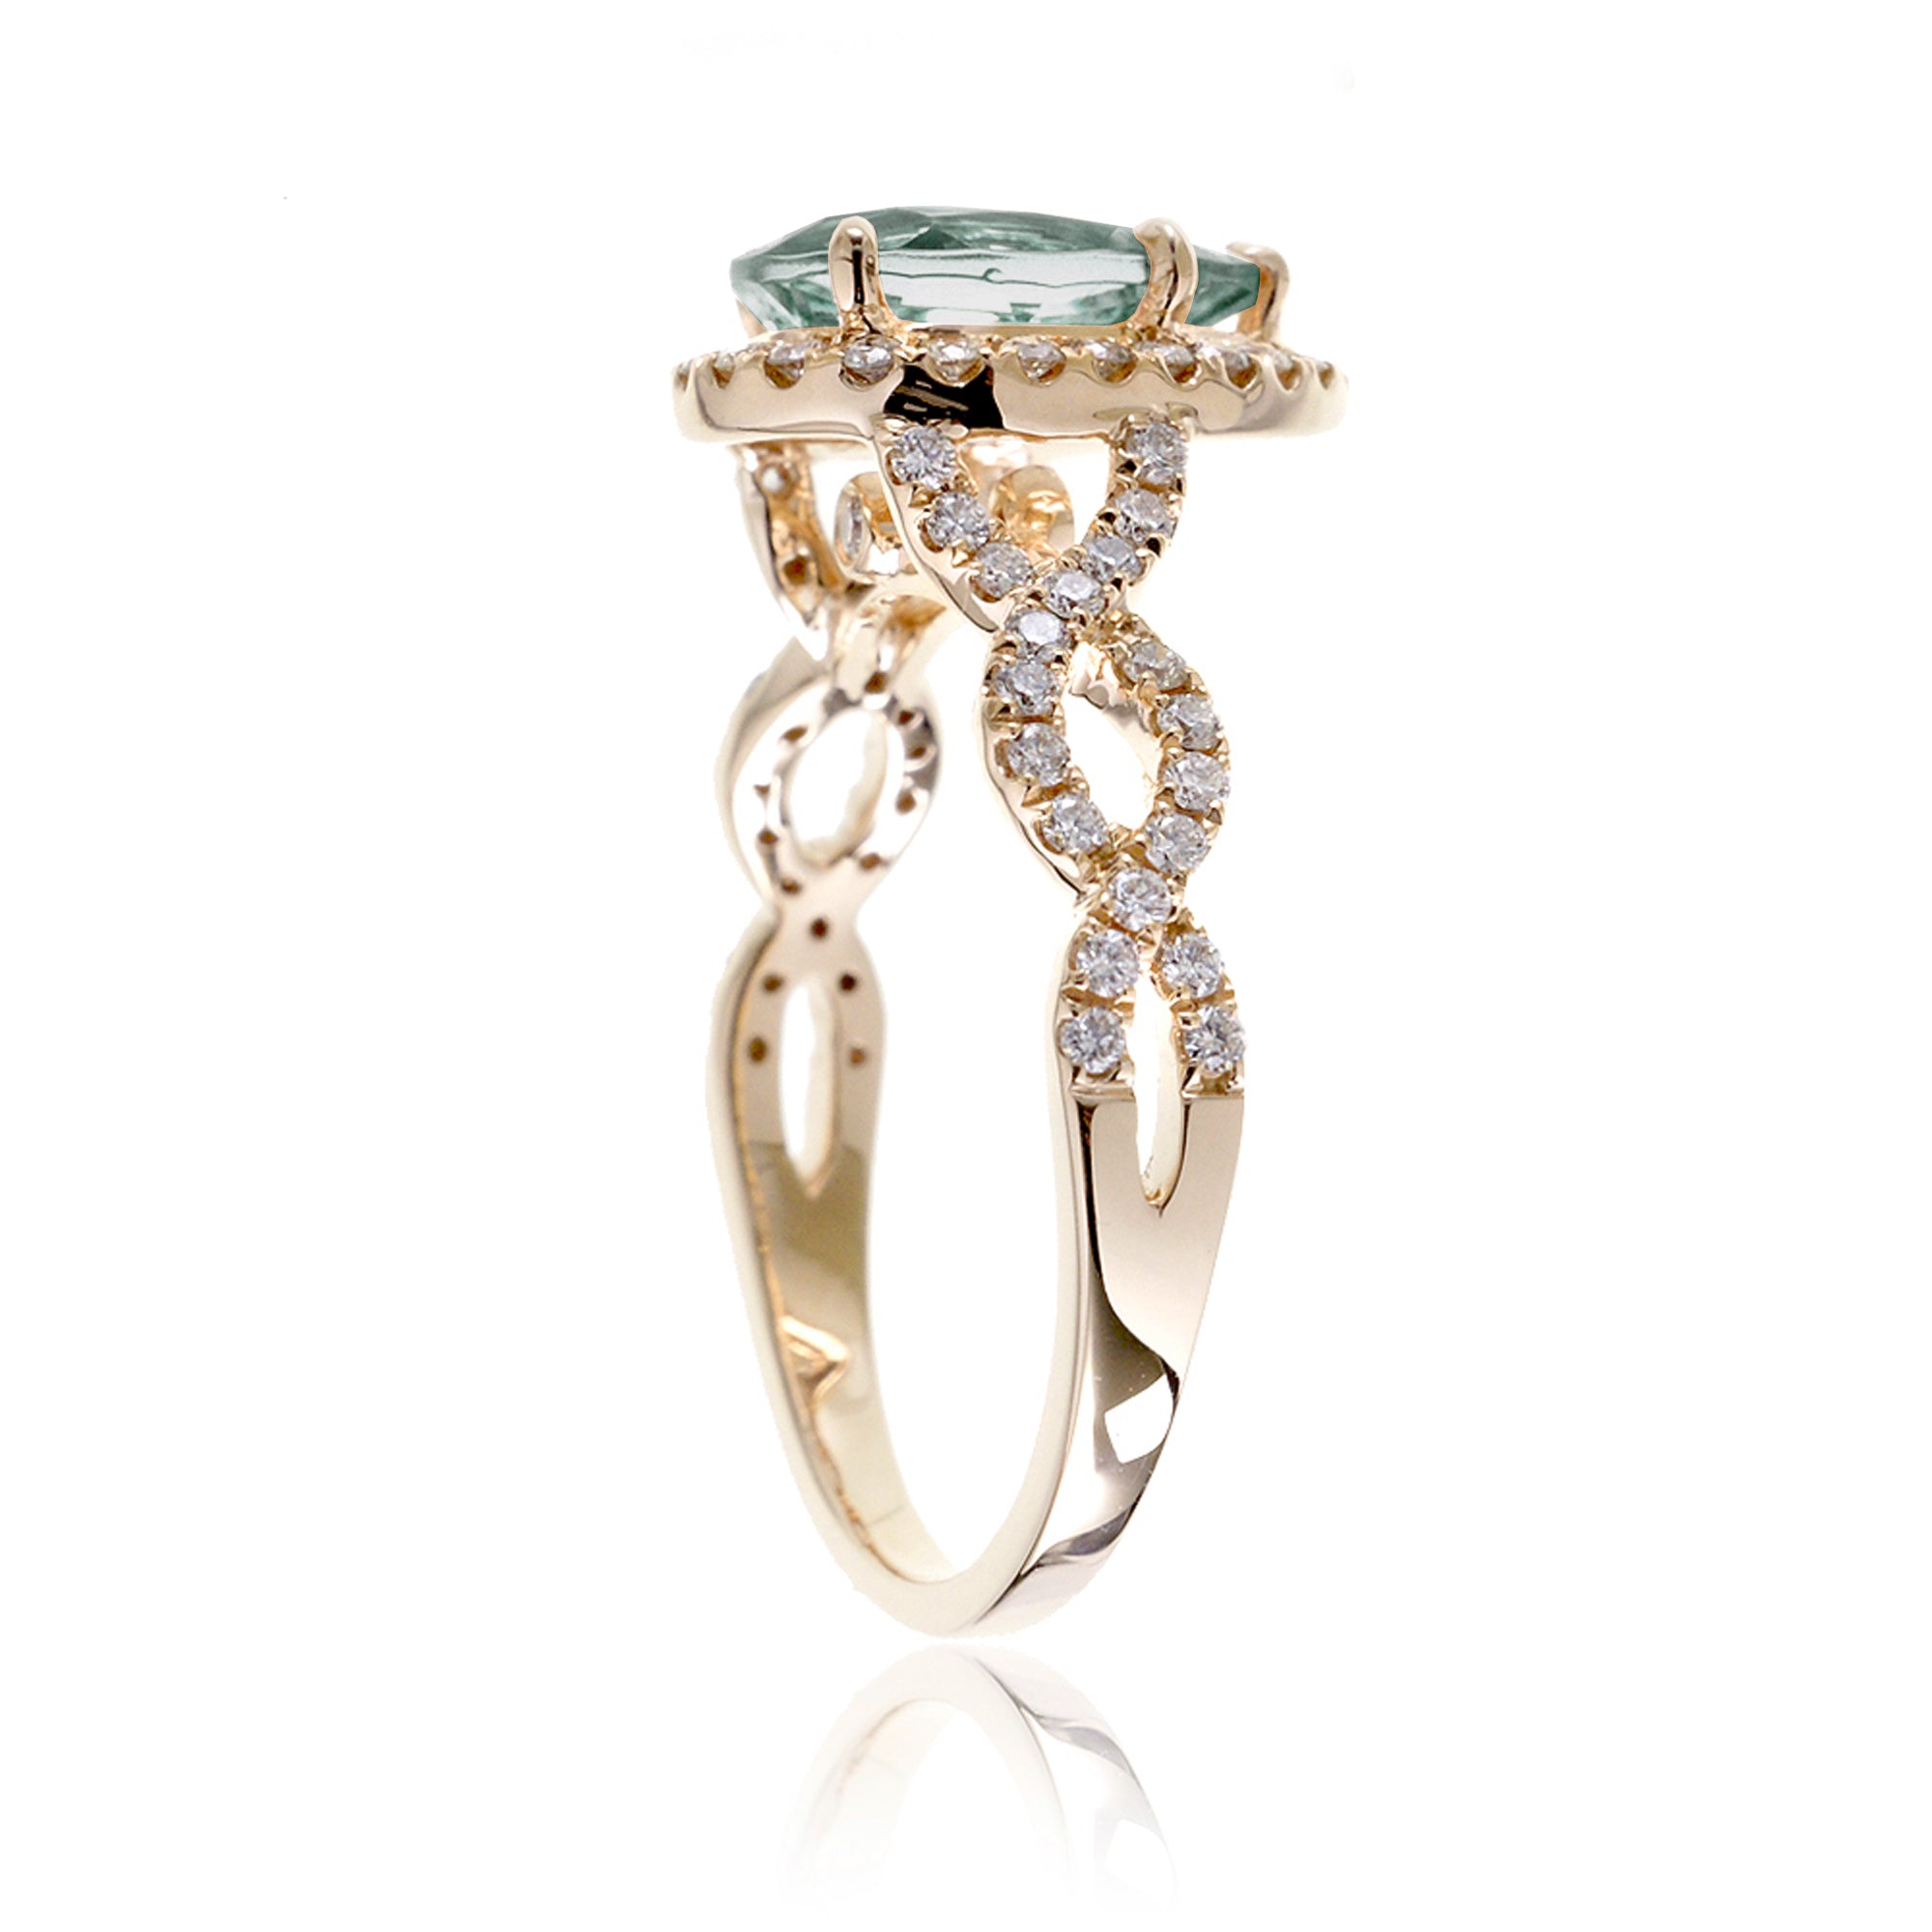 Twist band diamond halo ring with pear green sapphire yellow gold